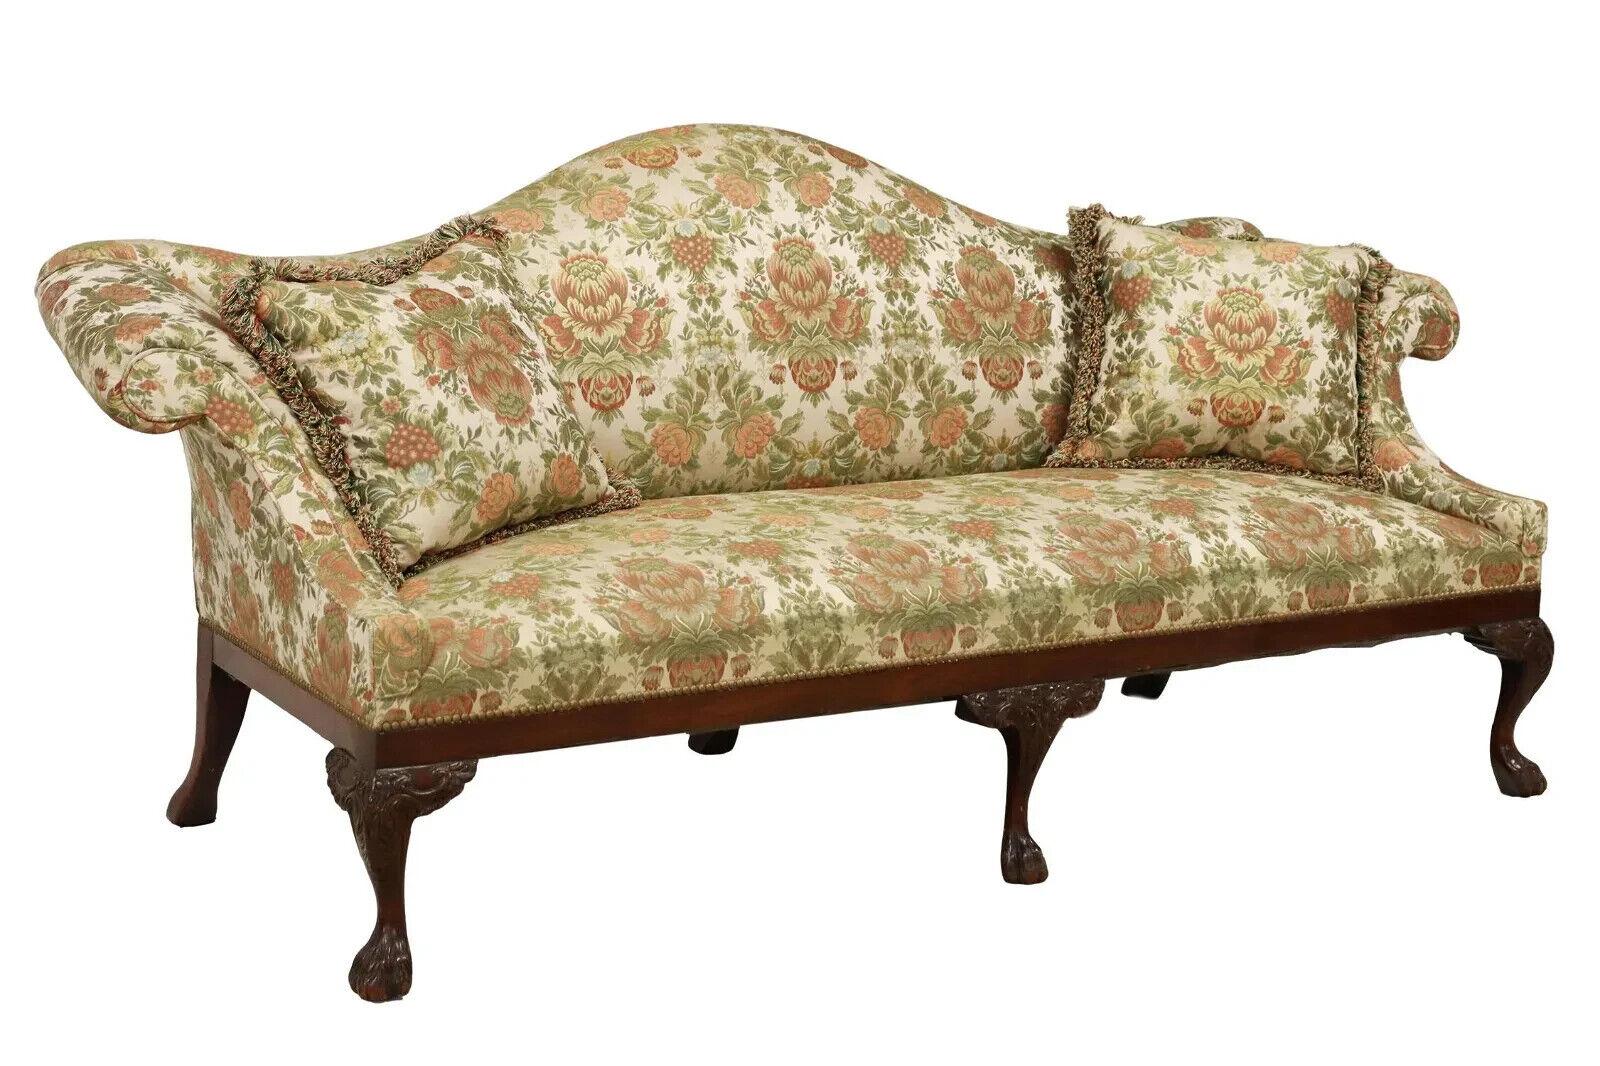 Very Charming Sofa, George II Style, Mahogany, Camelback, Floral Pattern, Vintage / Antique, 1900s, 20th century!!

George II style camelback sofa, floral patterned upholstery, rolled arms, carved mahogany frame, rising on cabriole legs, ending in